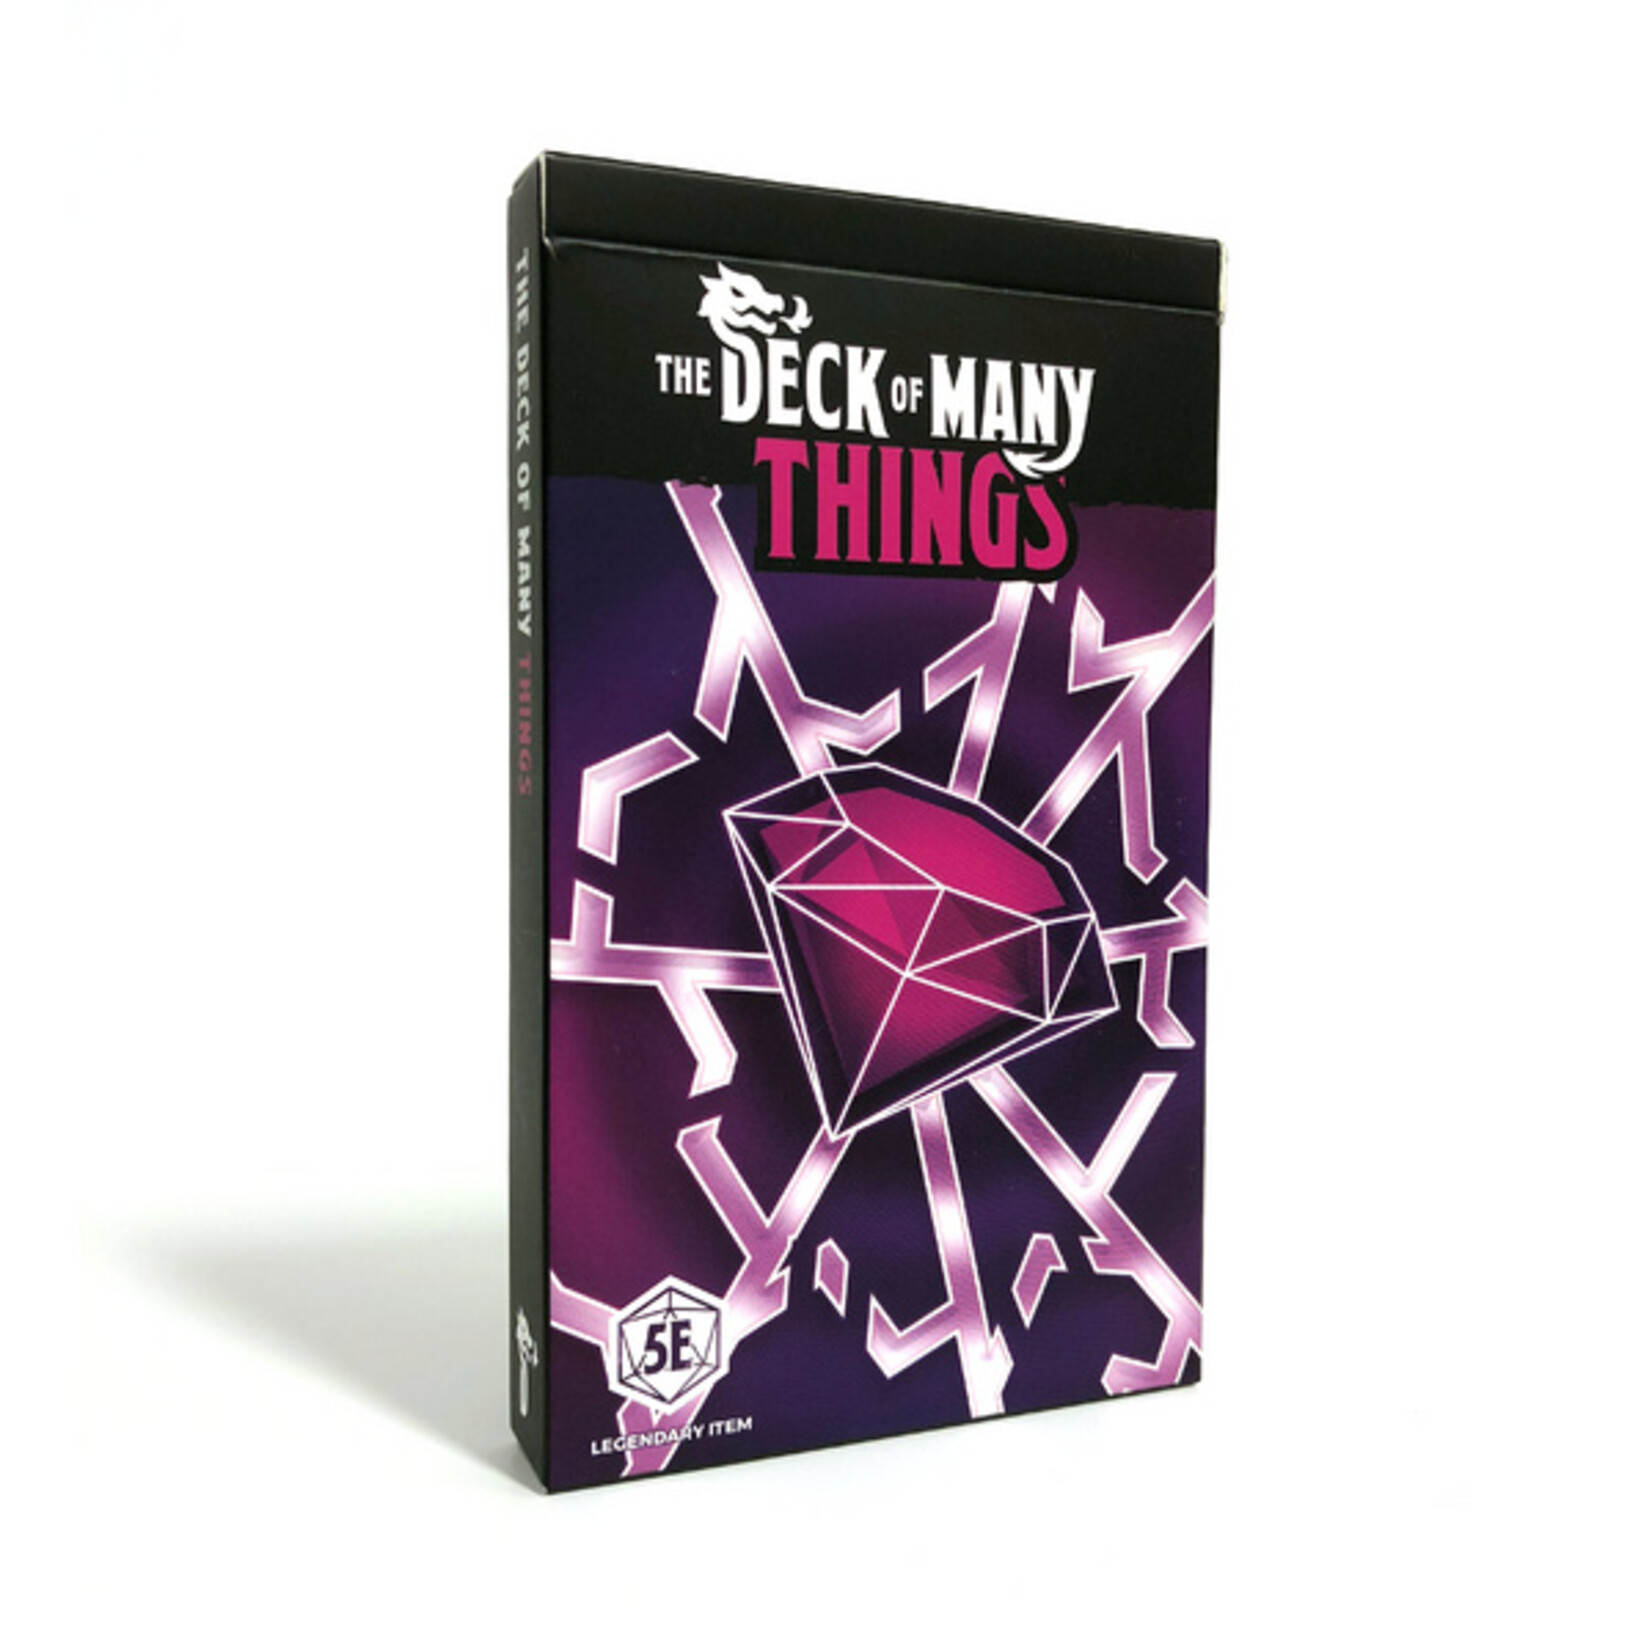 The Deck of Many (5E): Things